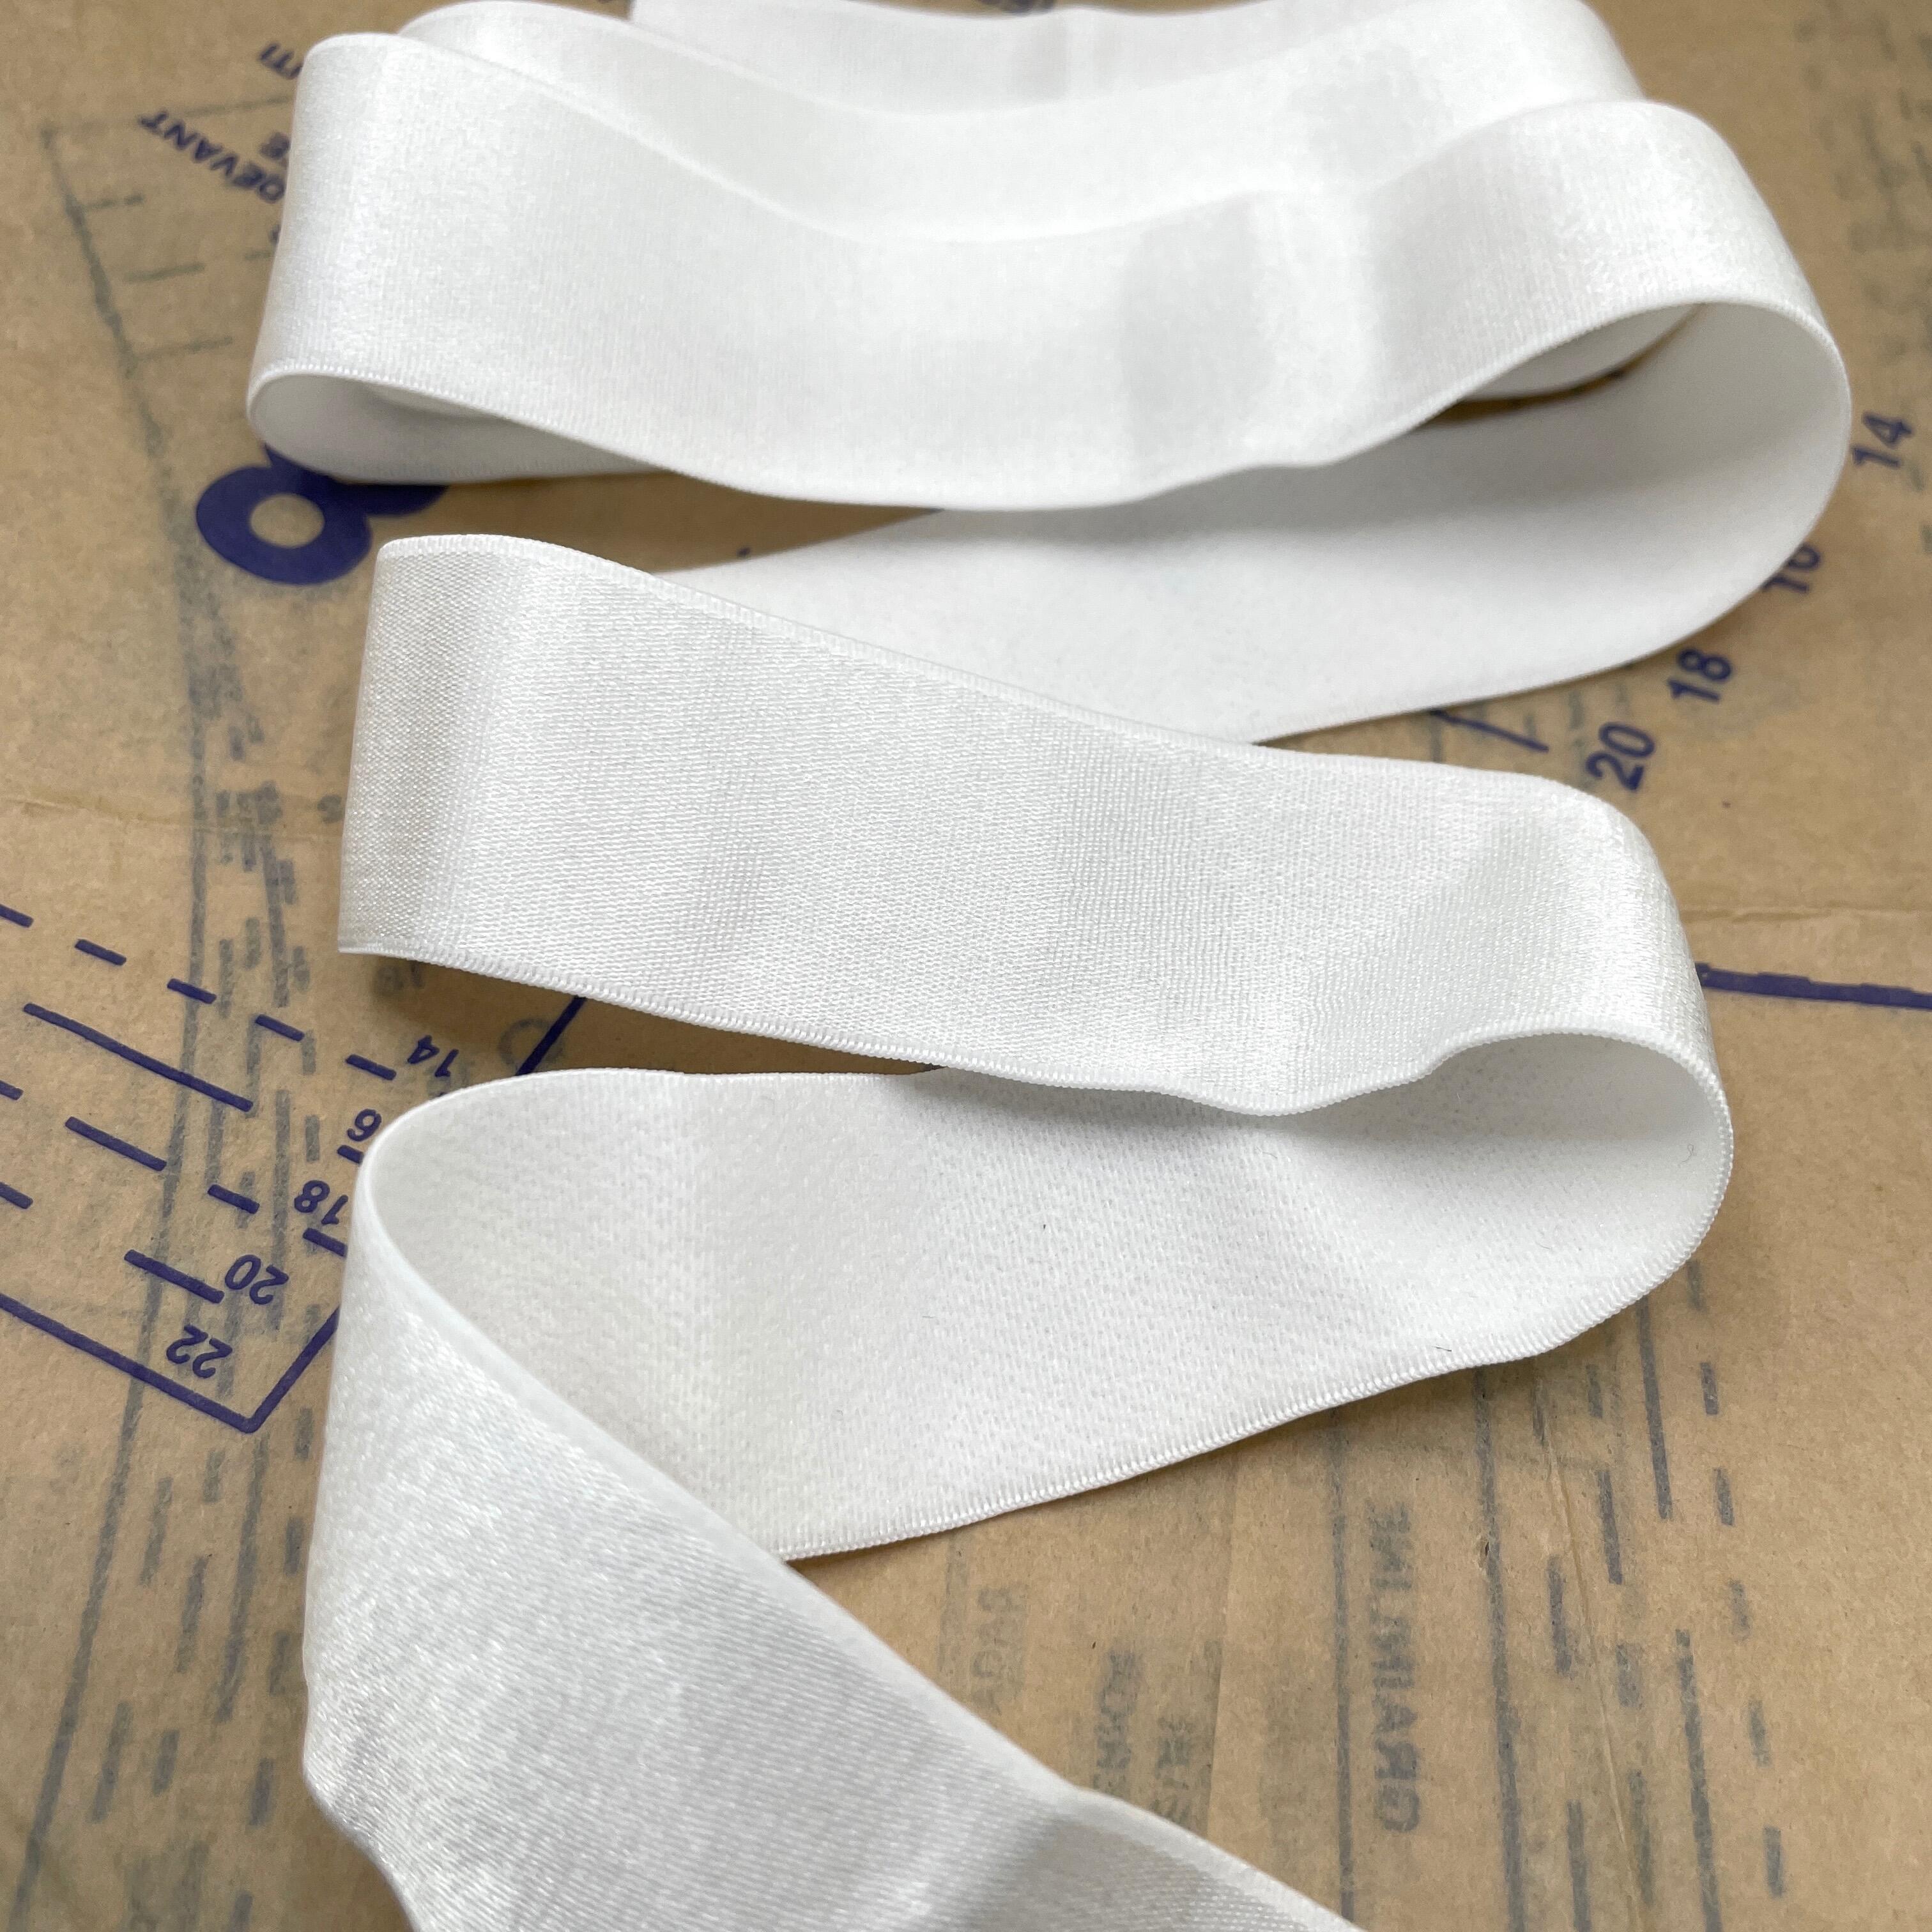 Bra Strap/Band & Suspender elastic - Soft & Stretchy (L32604) Shiny Face,  with soft back - 25mm WHITE